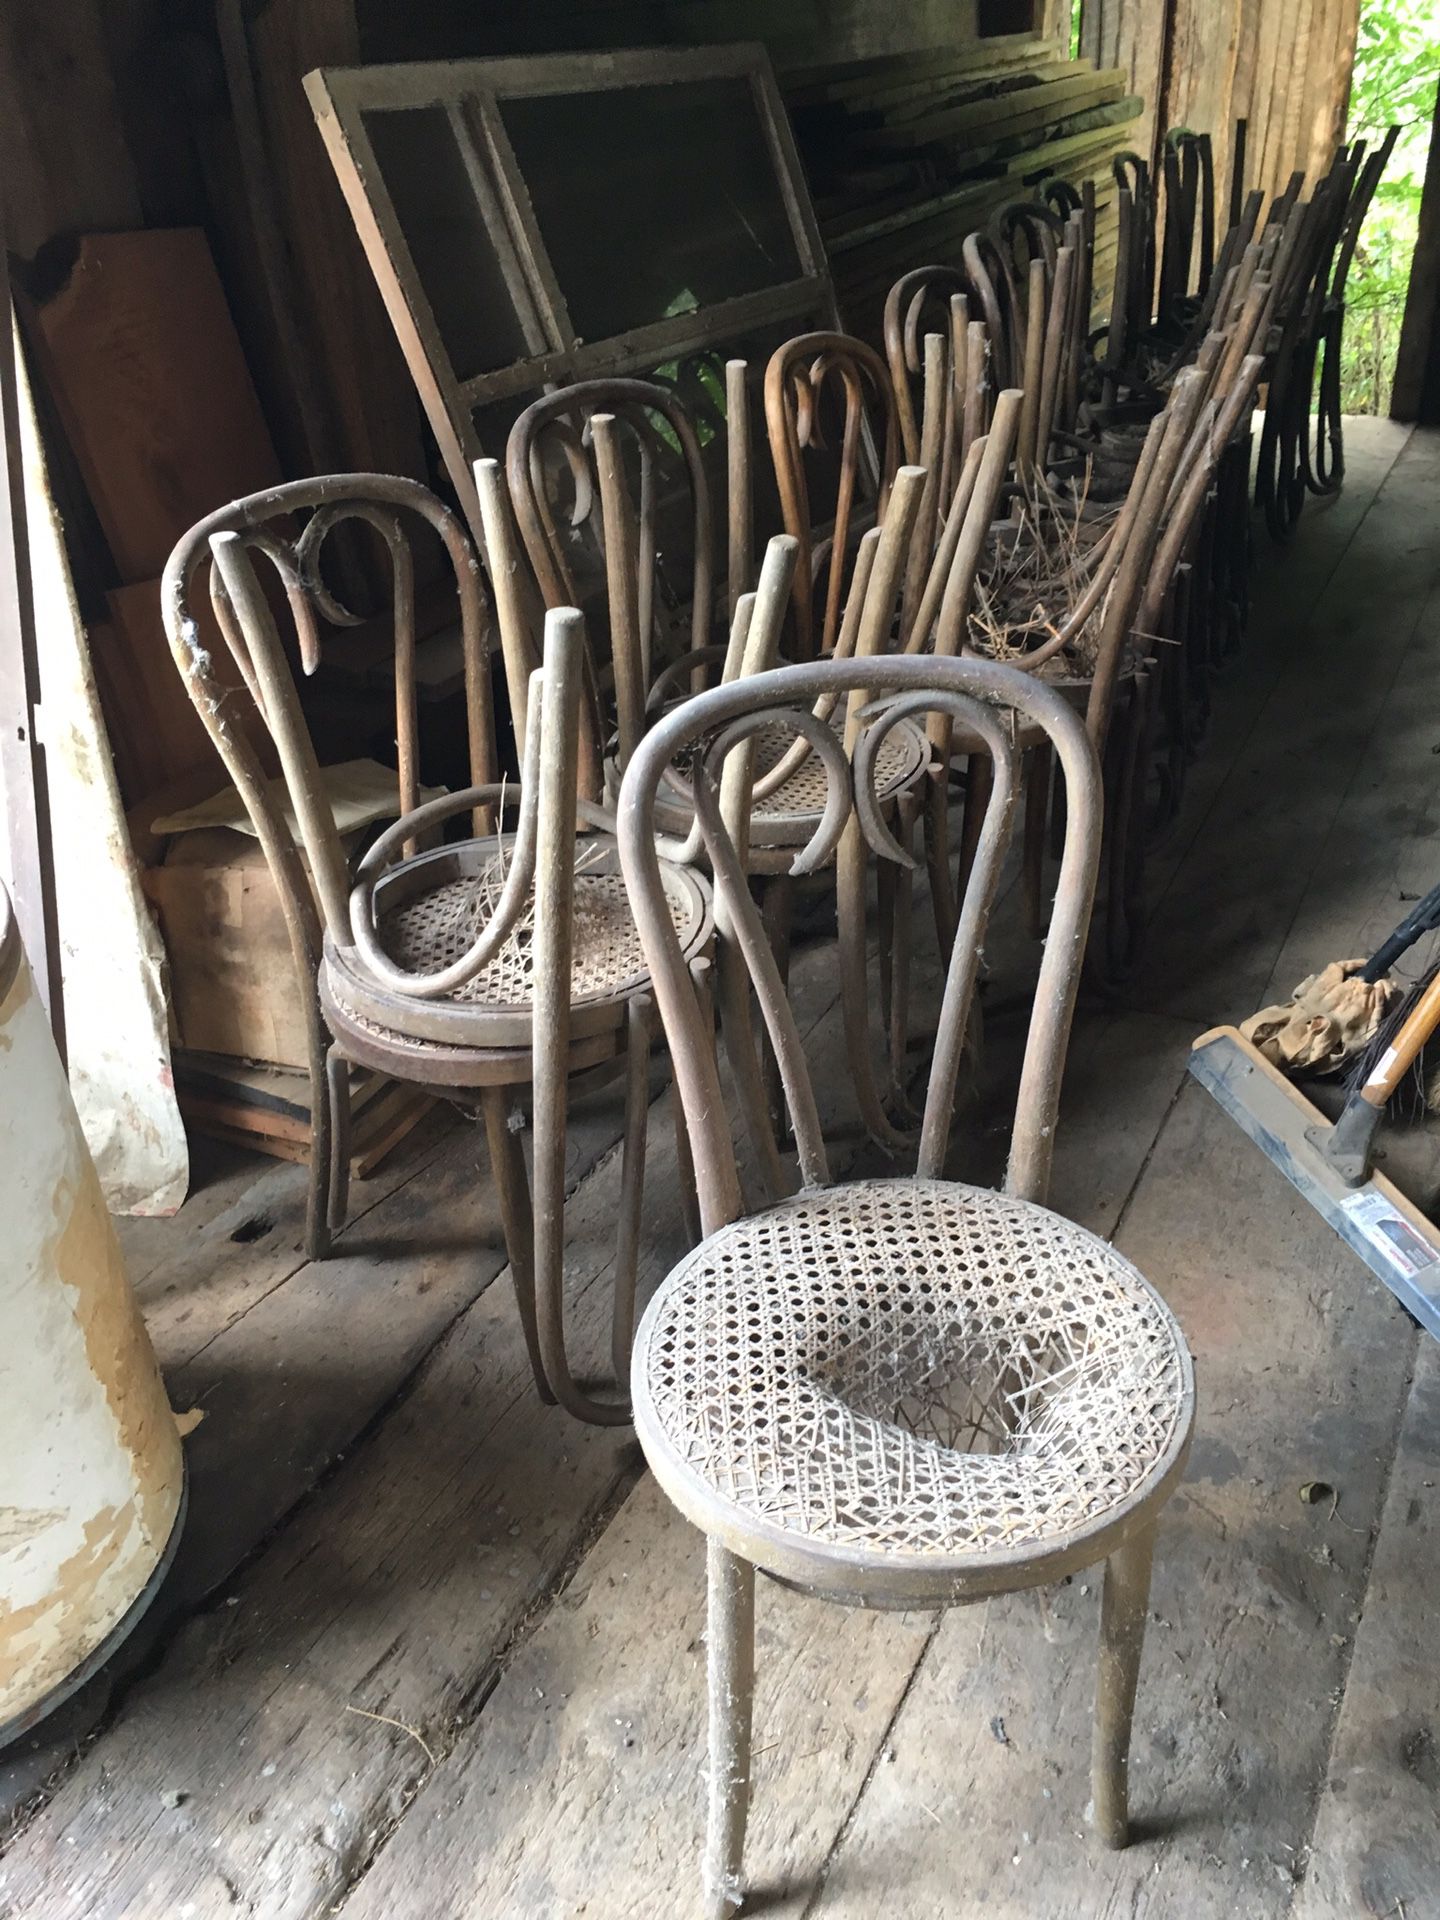 Bentwood chairs, 19, some repair needed,